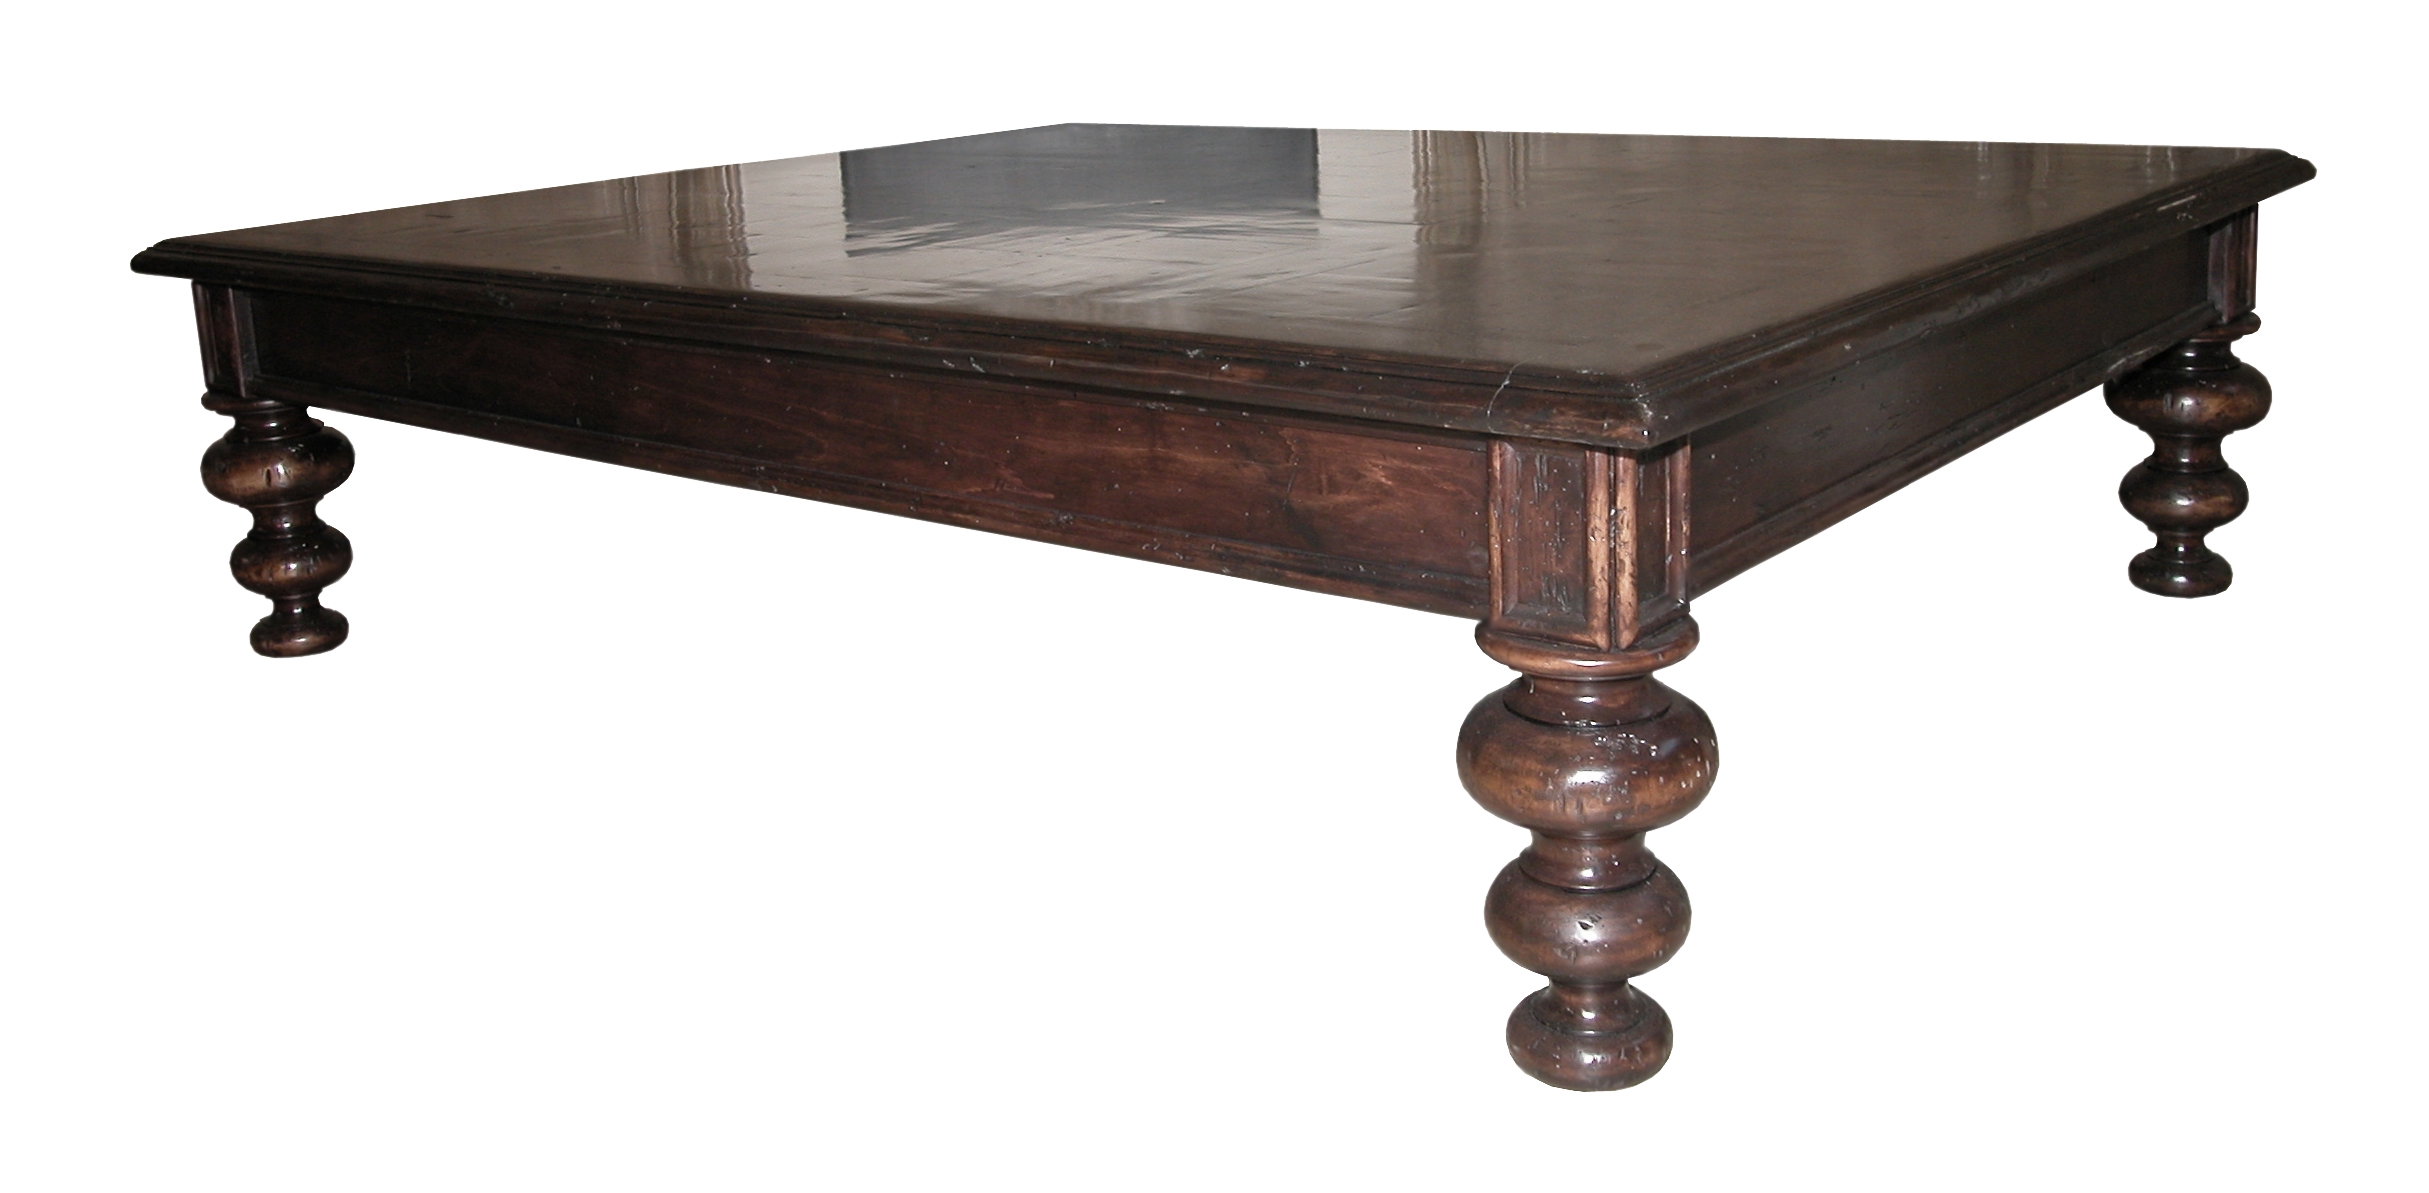 Deauville Coffee Table with Parquet Top